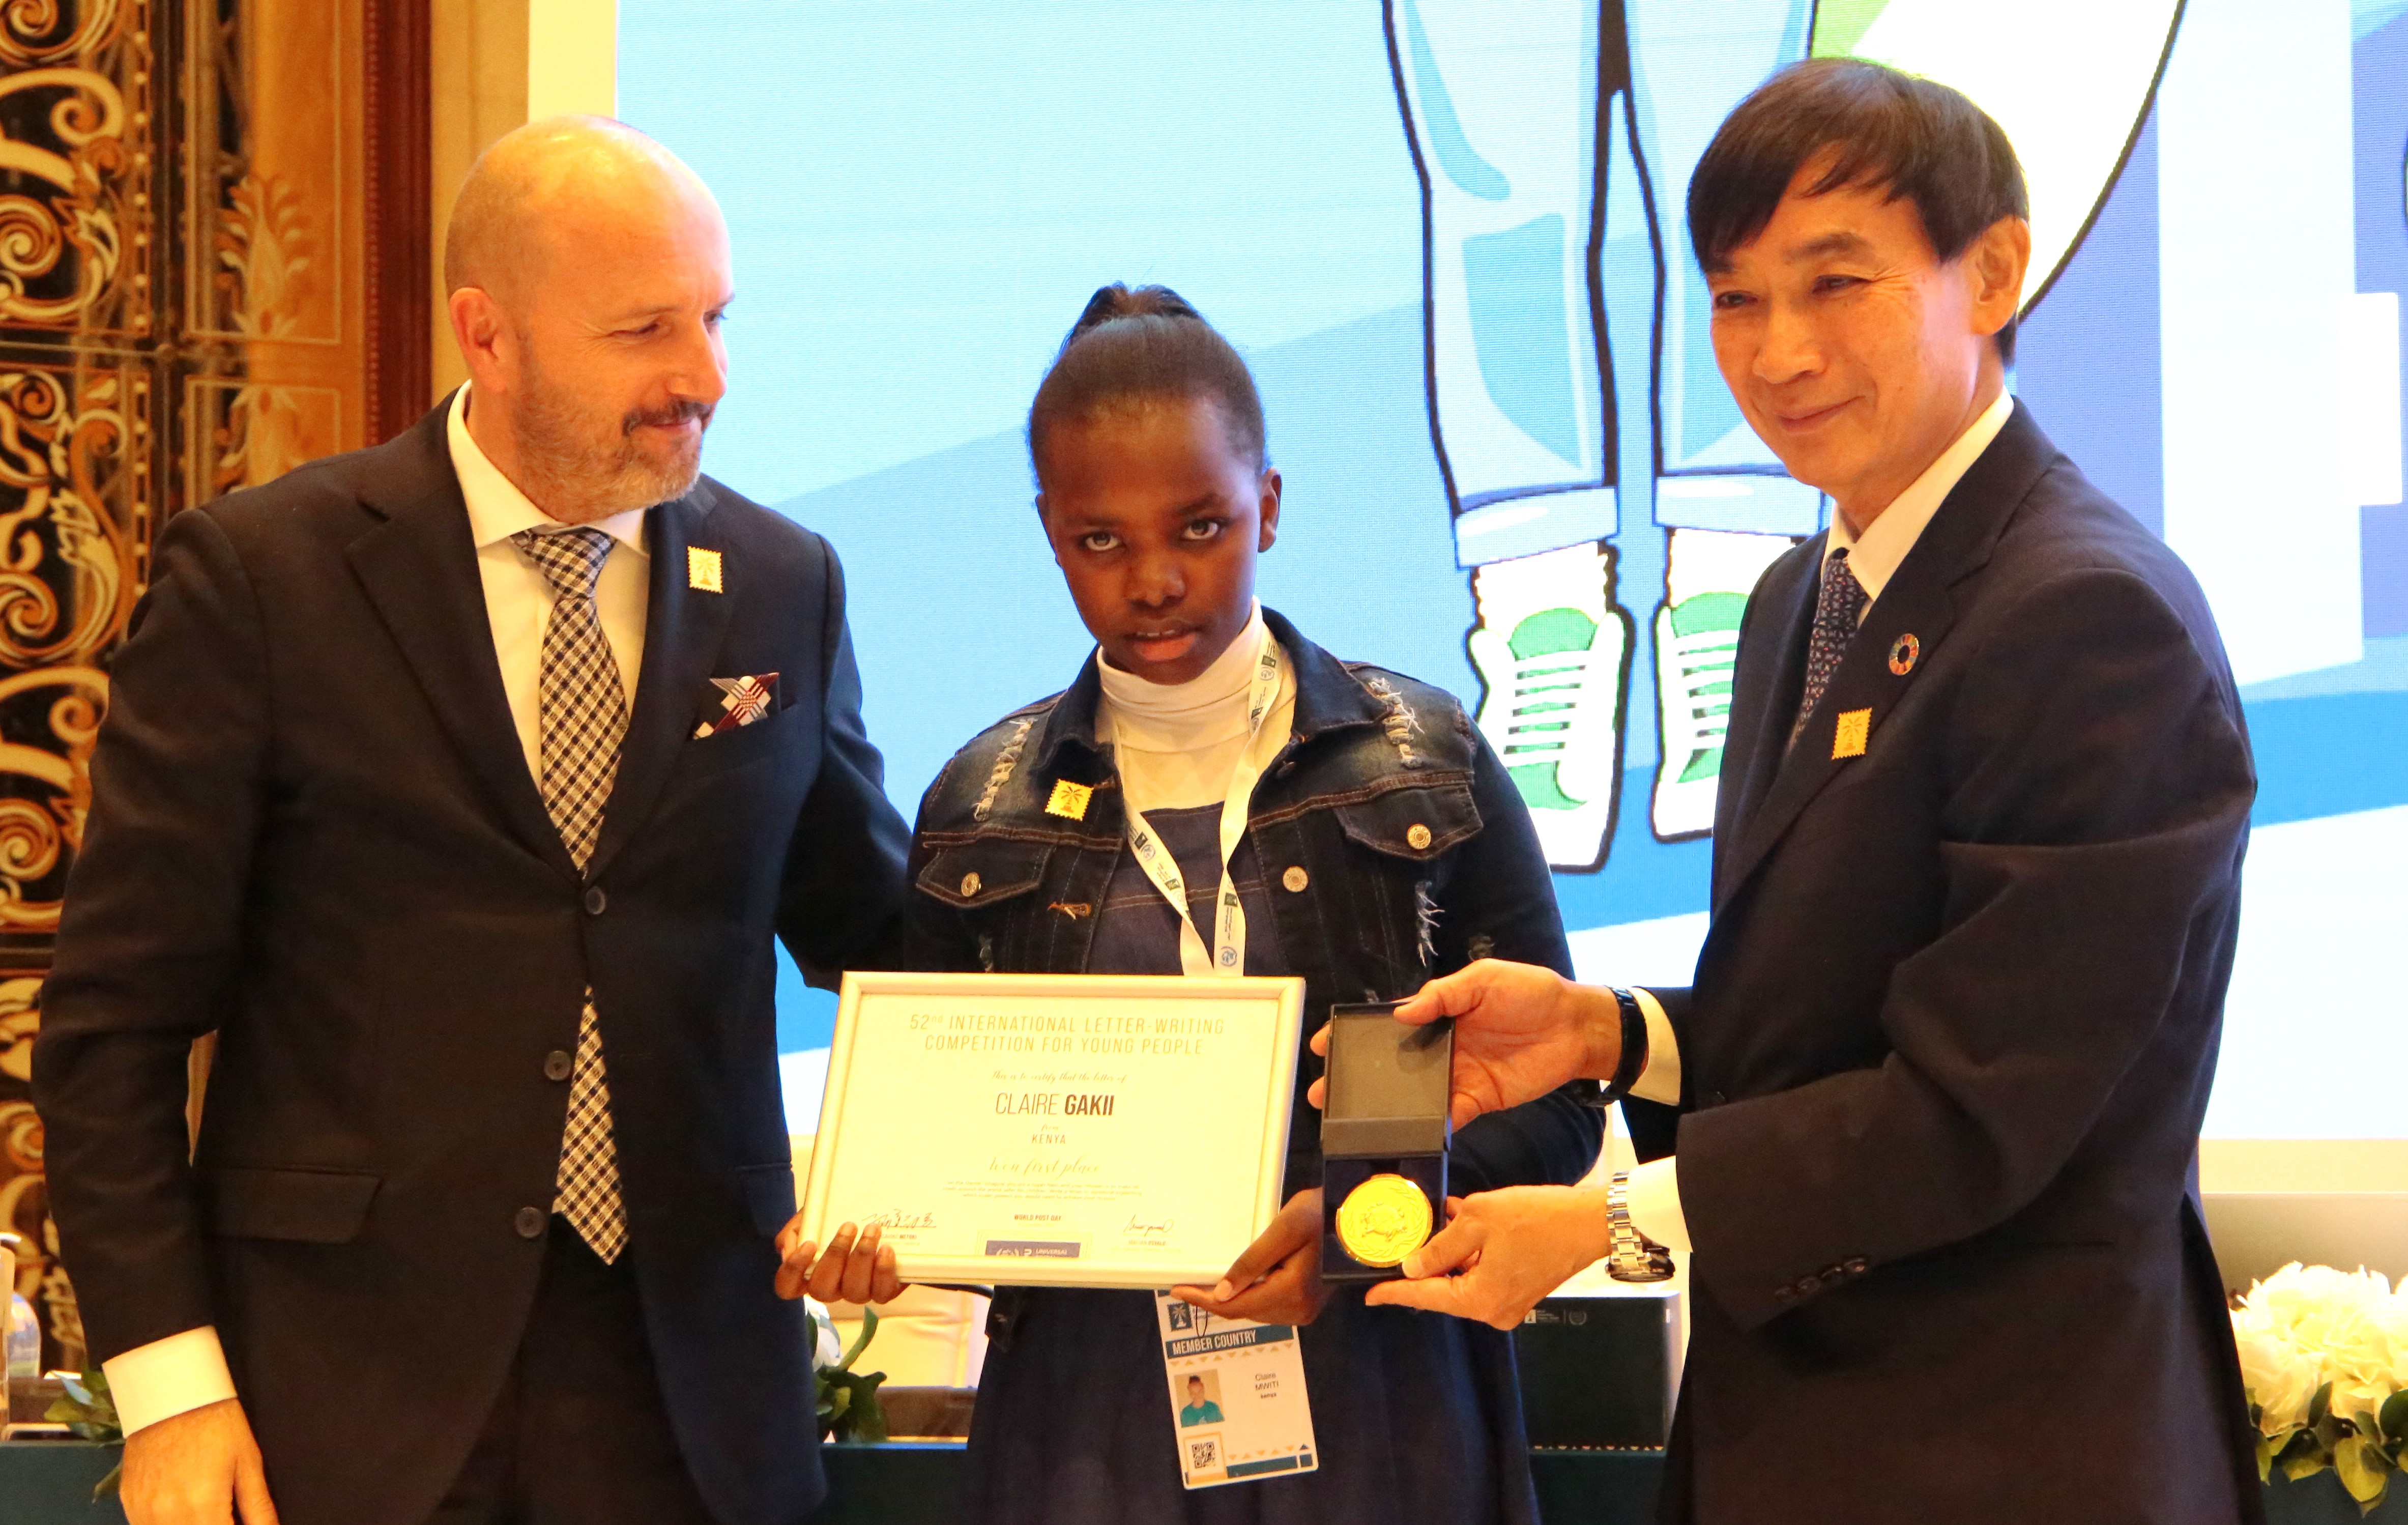 Kenya’s Claire Gakii (centre) receives the award of the winner of the International Letter Writing Competition for Young People from the Universal Postal Union Director General Mr. Masahiko Metoki (right) and his deputy Osvald Marjan in Riyadh, Saudi Arabia. She beat about 1.7 million others to clinch the coveted prize.